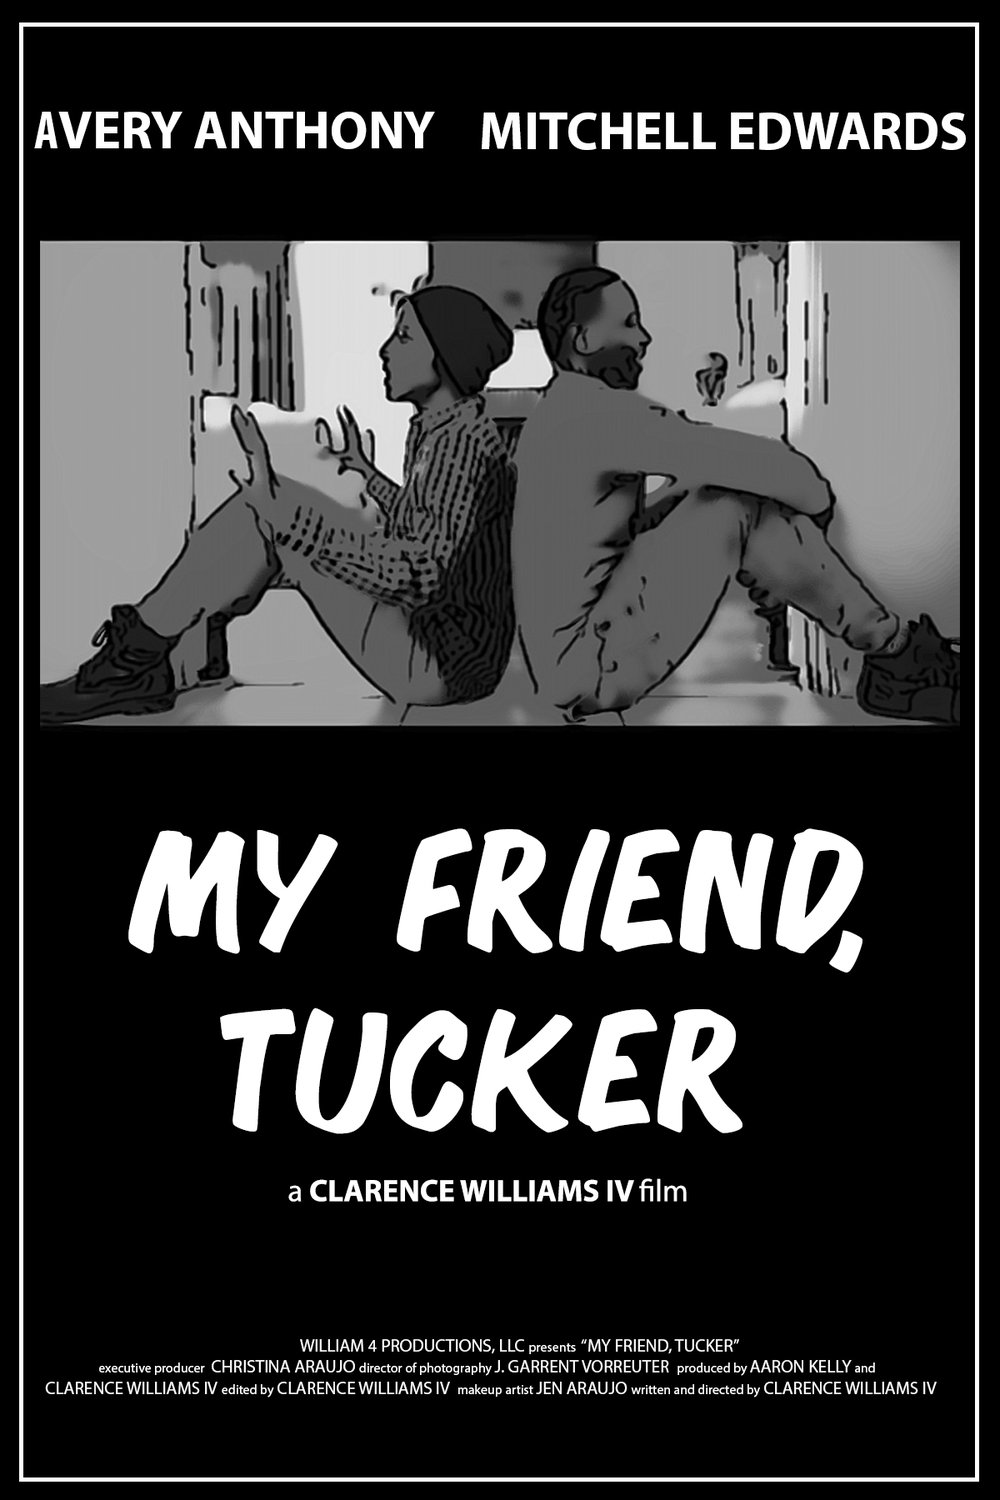 Poster of the movie My Friend, Tucker